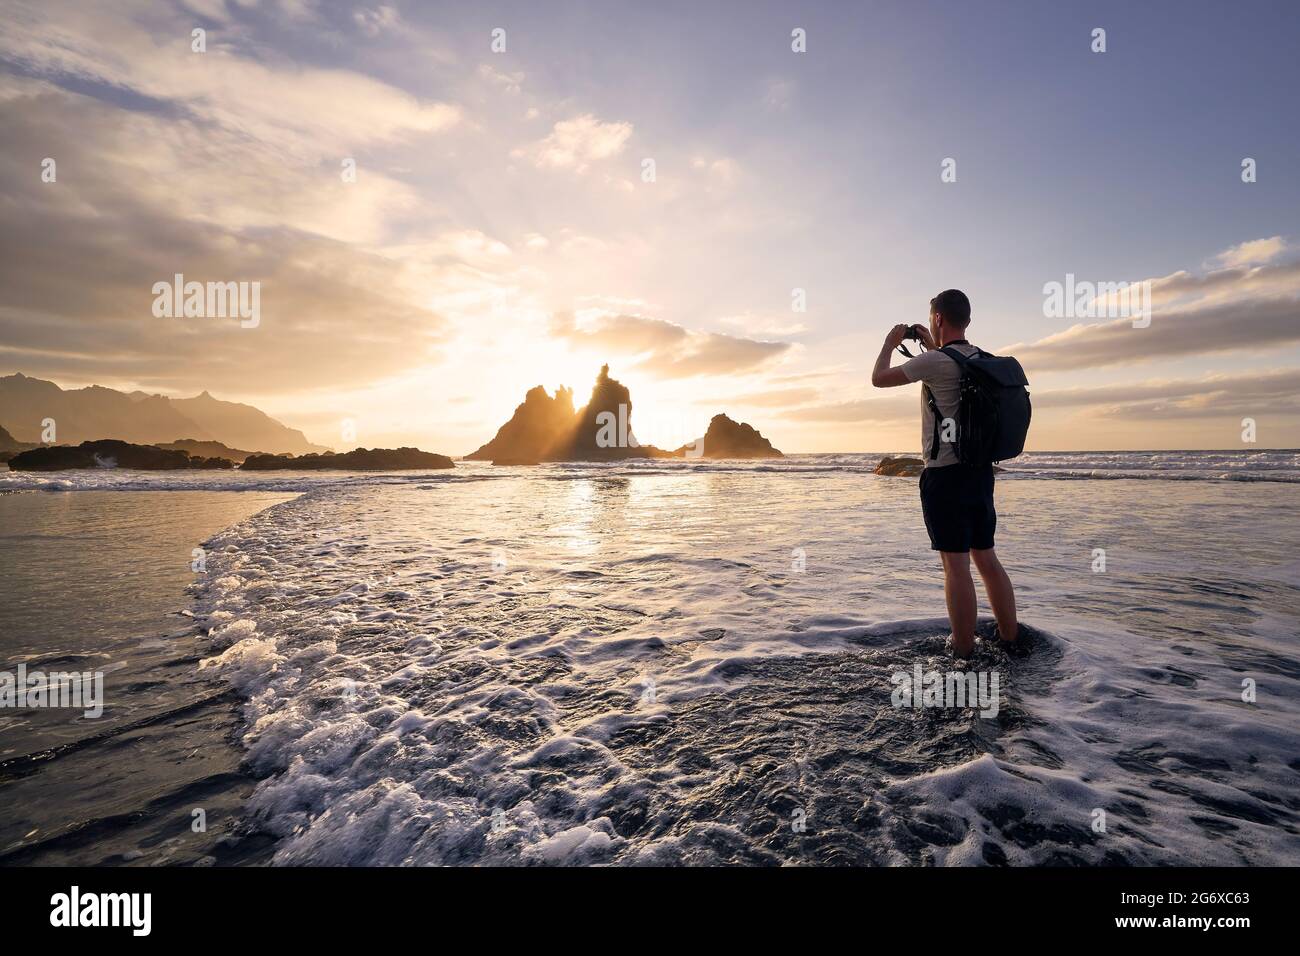 Man during photographing landscape with cliff. Young photographer on beach at beautiful sunset. Tenerife, Canary Islands, Spain. Stock Photo